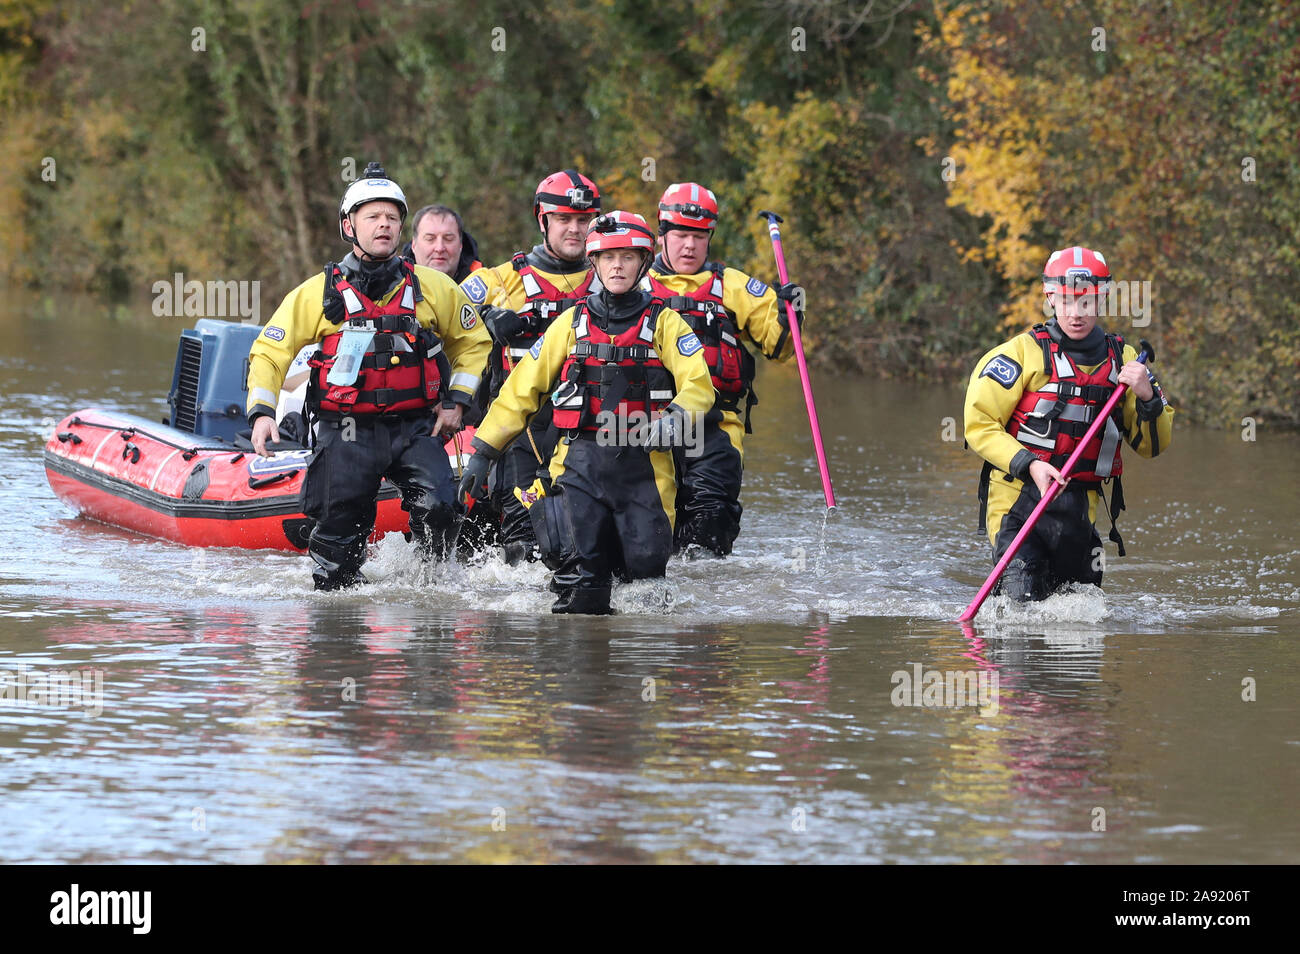 Rescuers pull a boat through floodwater in Fishlake, Doncaster. The Prime Minister is set to chair a meeting of the Government's emergency committee after severe flooding in parts of the country, where rain is finally expected to ease this afternoon. Stock Photo